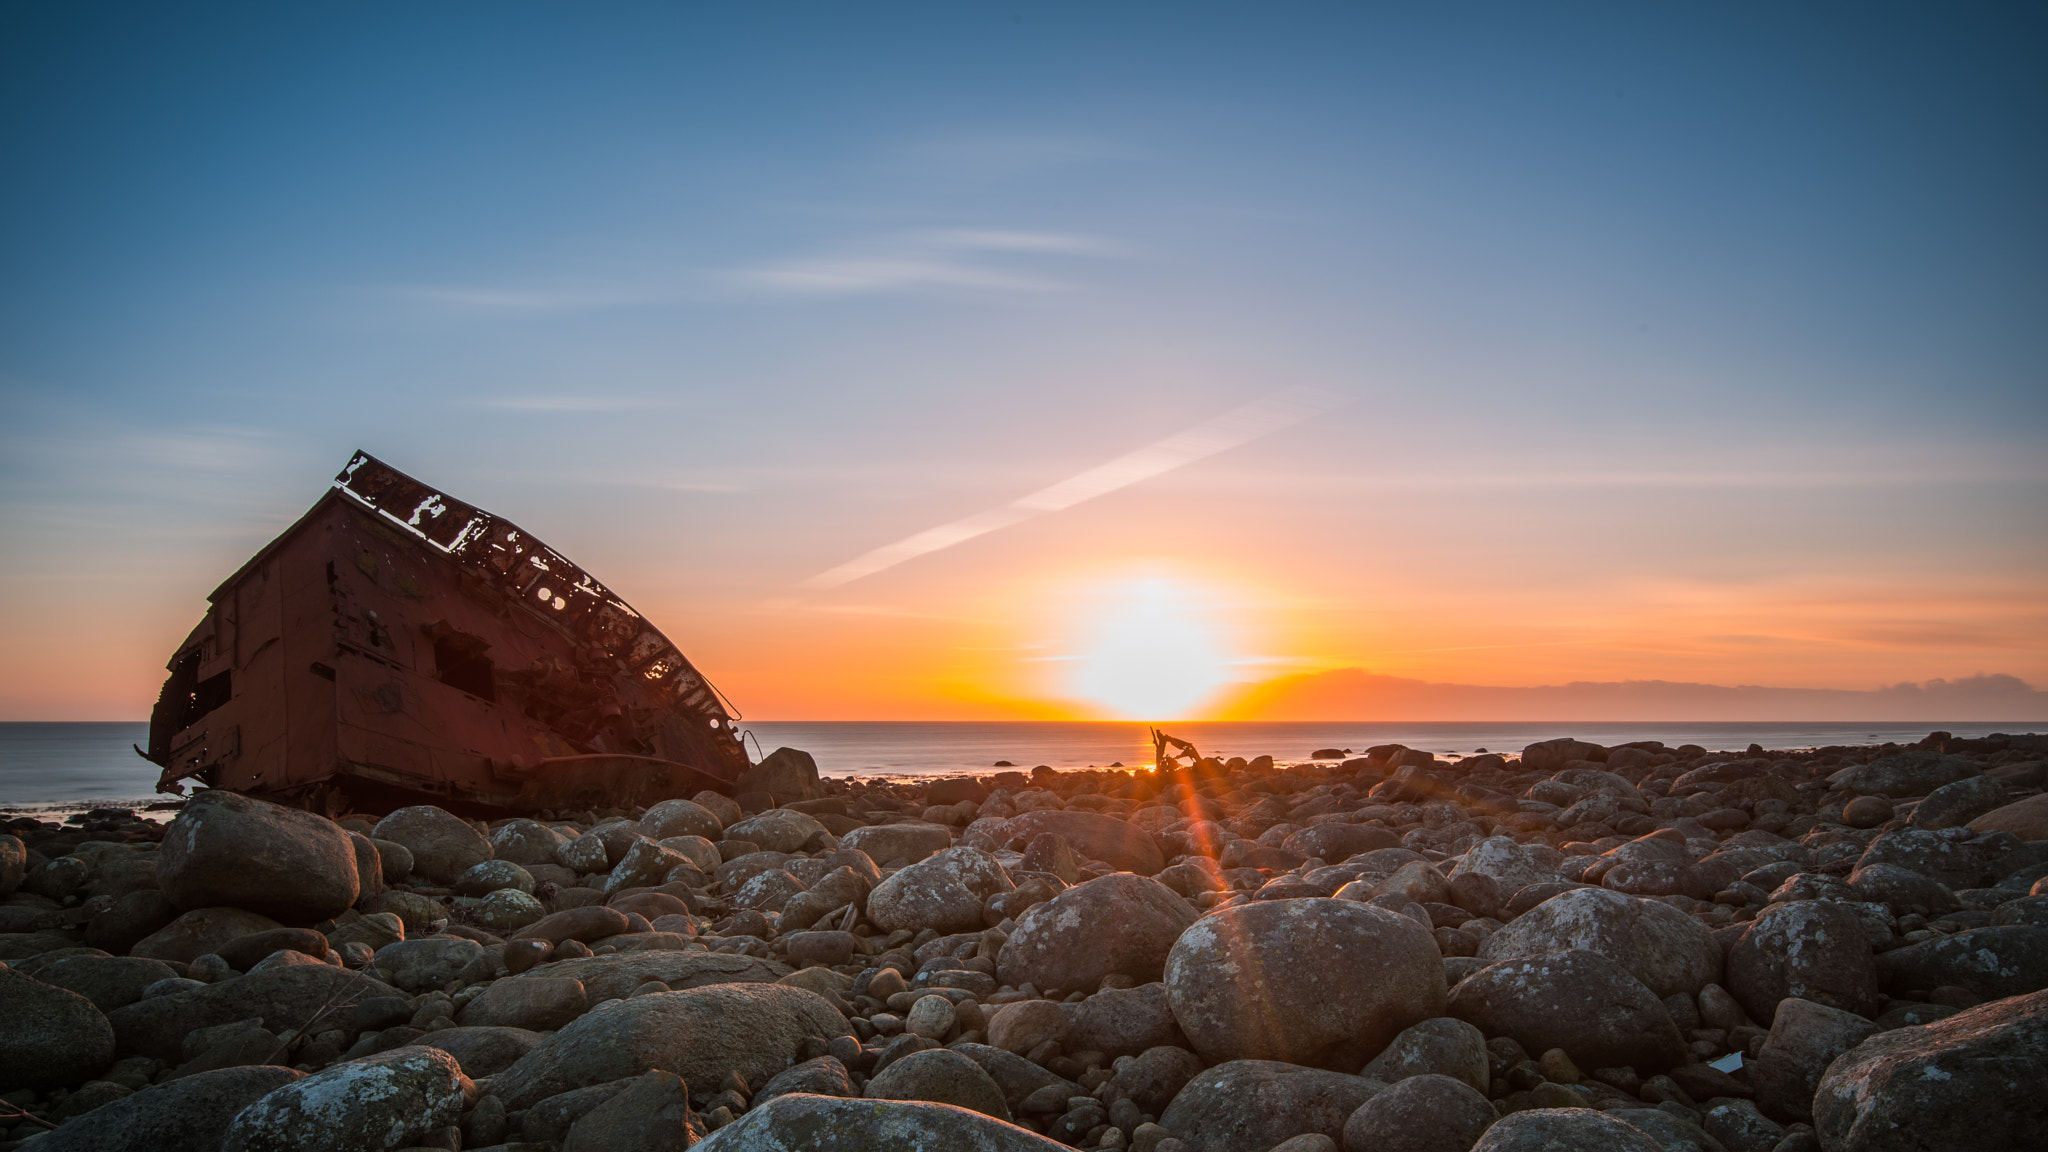 Nikon D810 sample photo. Sunset of the shipwreck of nordfrost. westcoast of norway photography